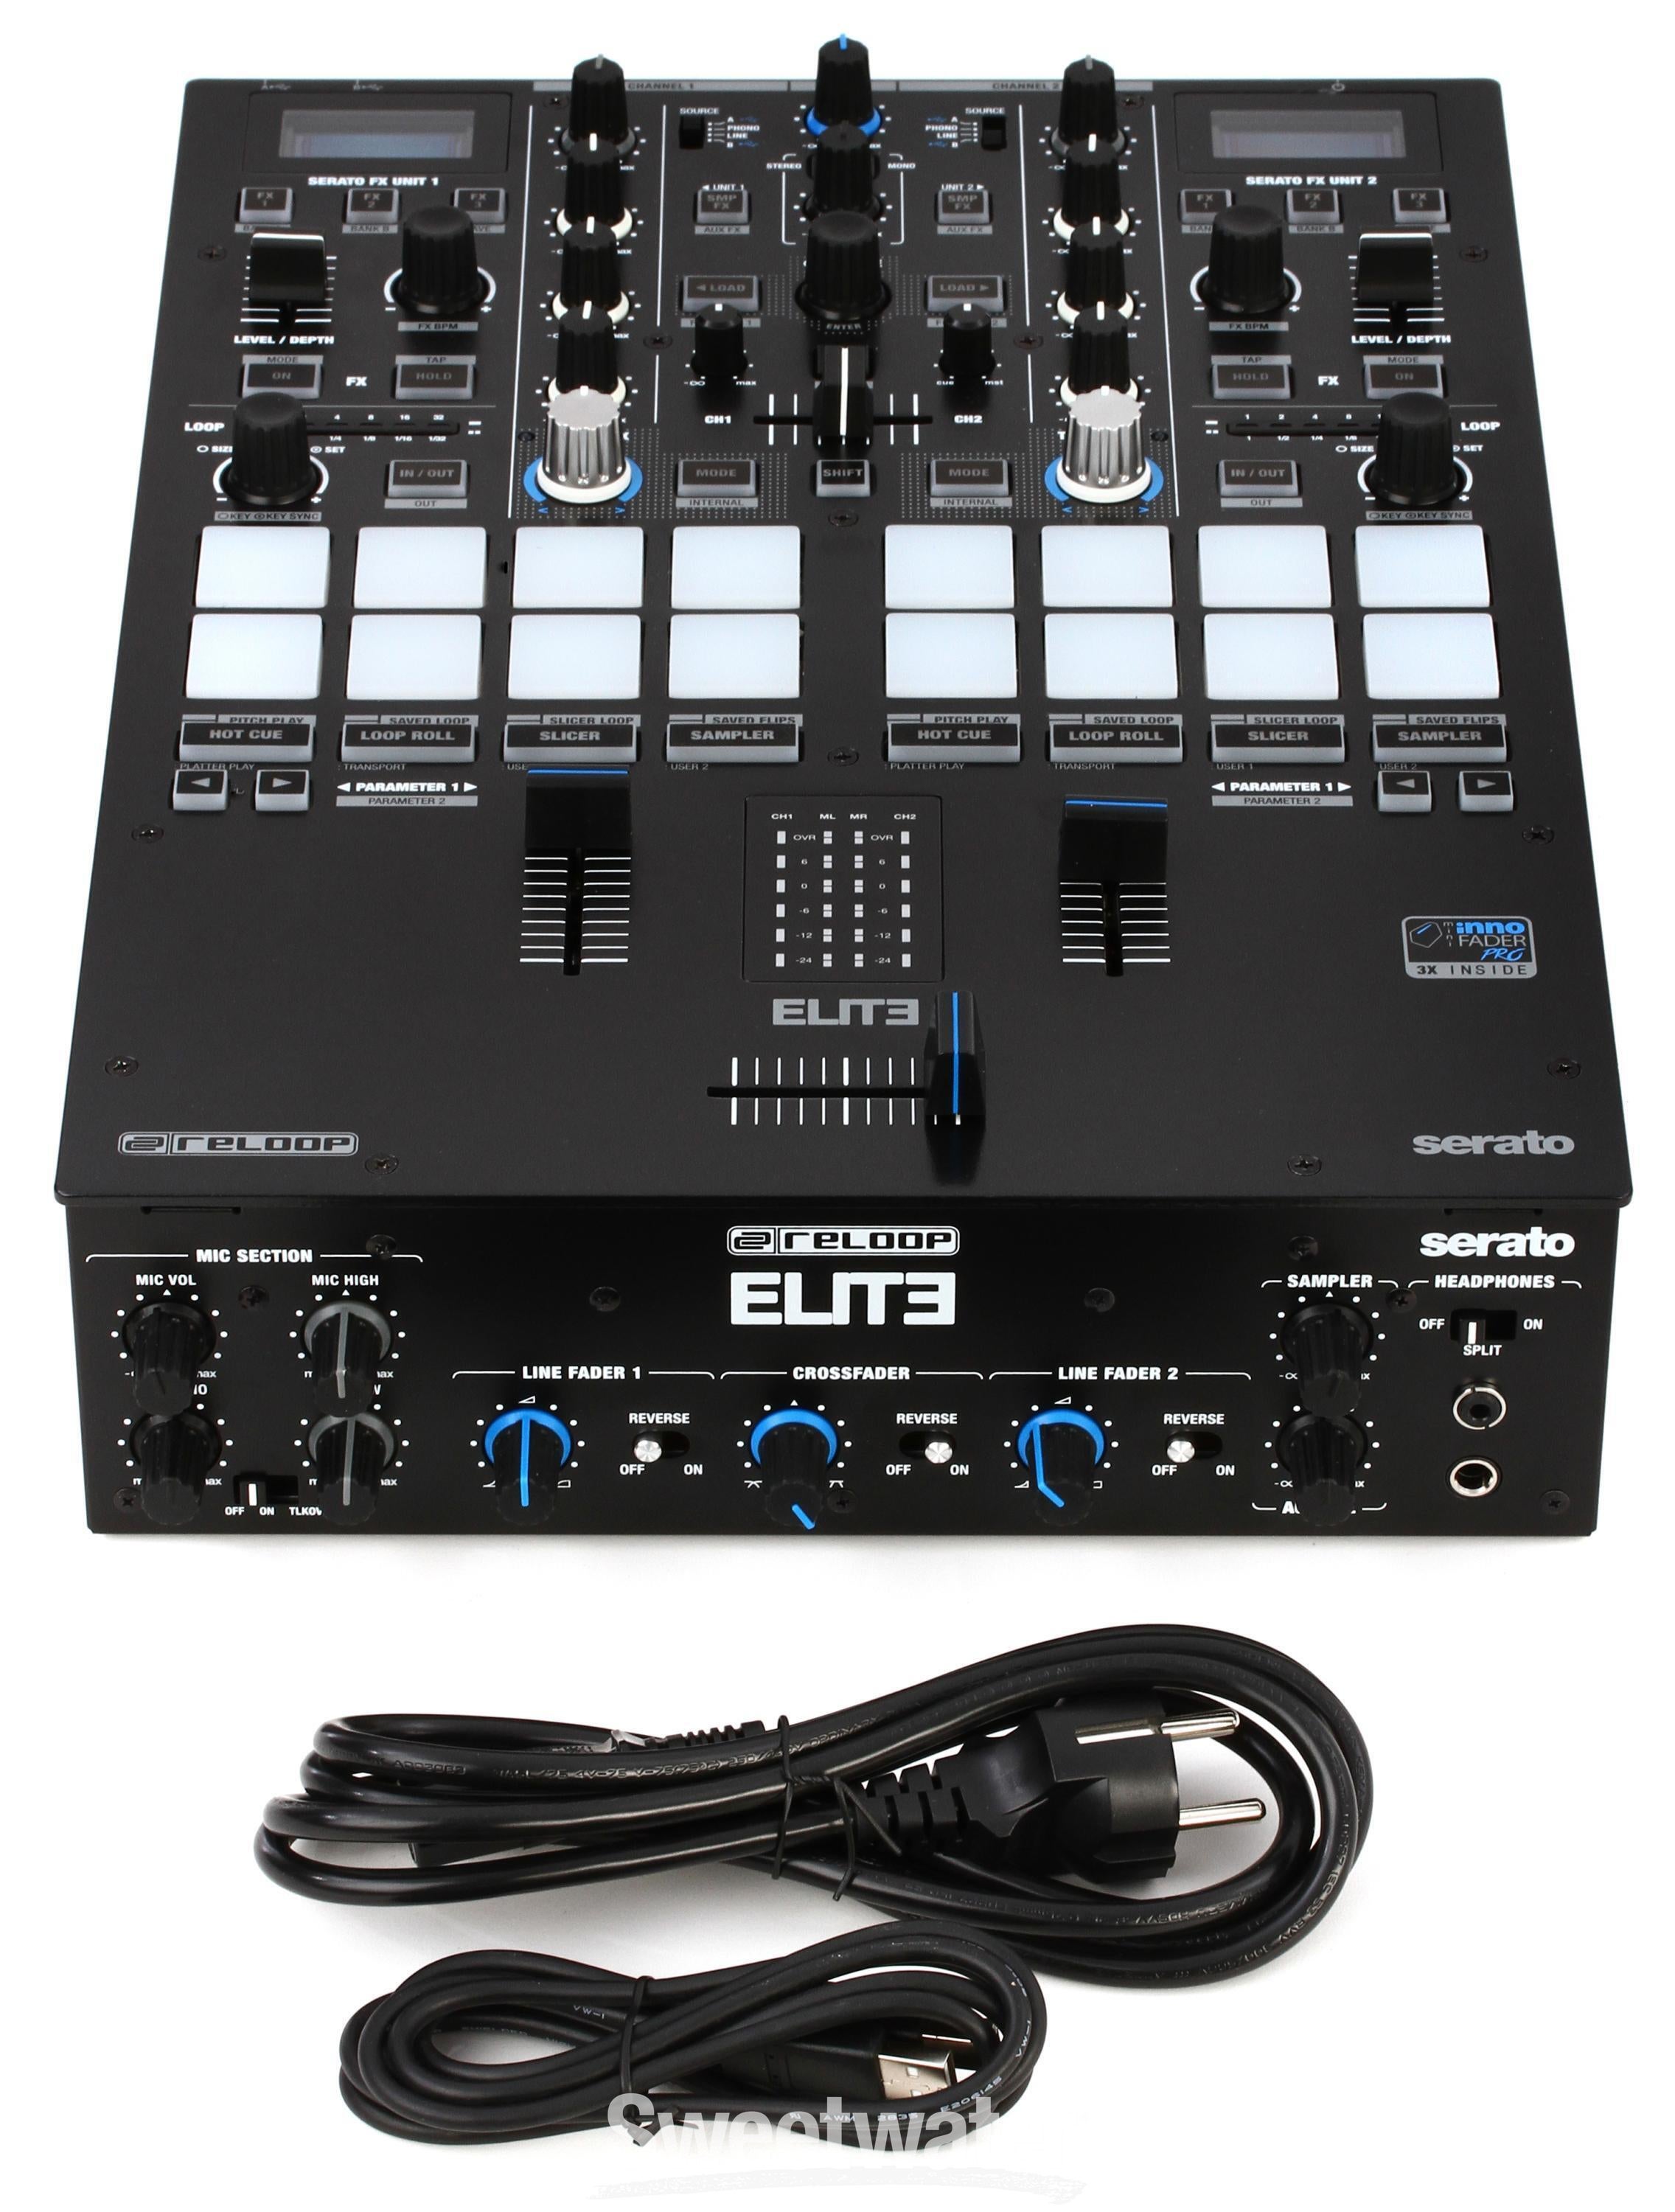 Reloop Elite 2-channel DVS Mixer for Serato | Sweetwater